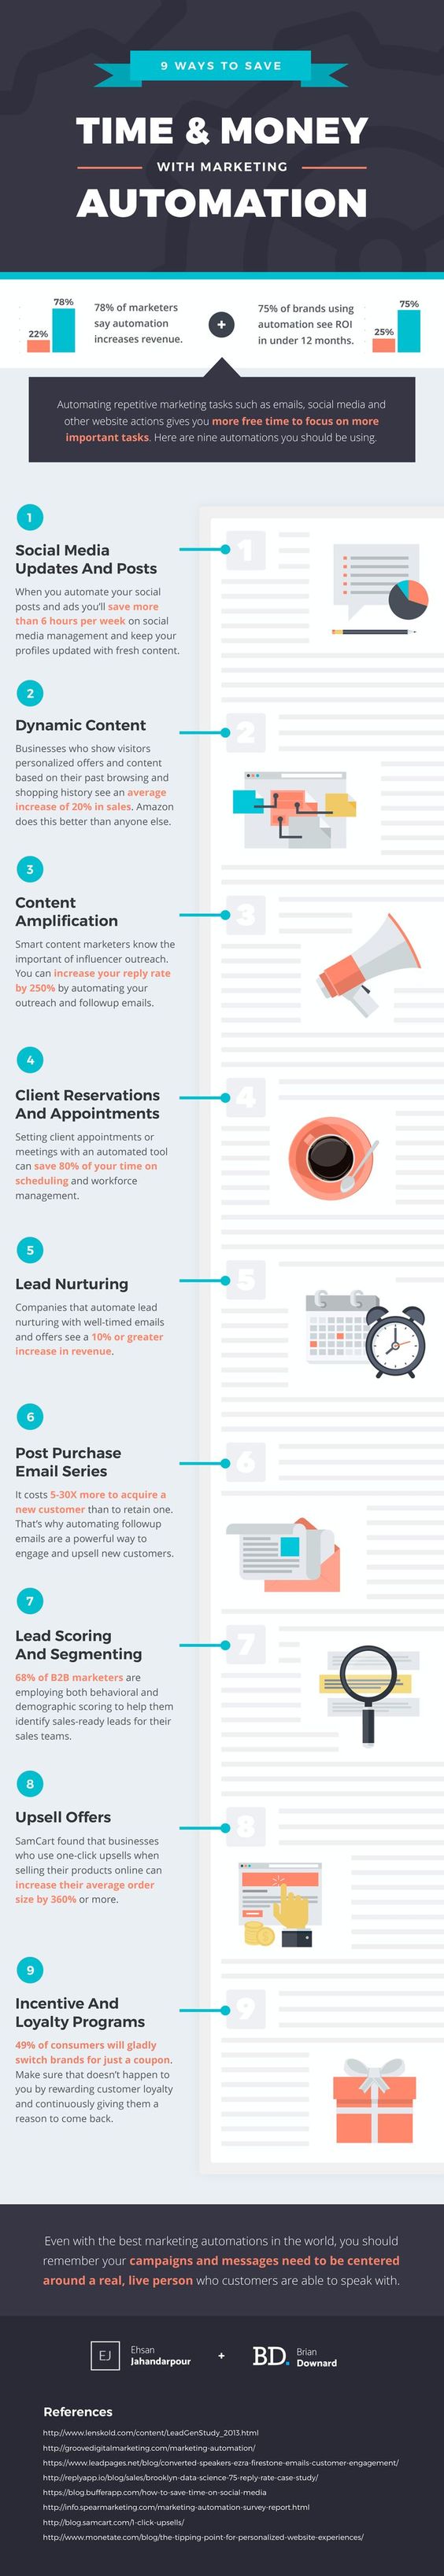 Infographic Of The Week: 9 Ways To Save Time & Money With Marketing Automation